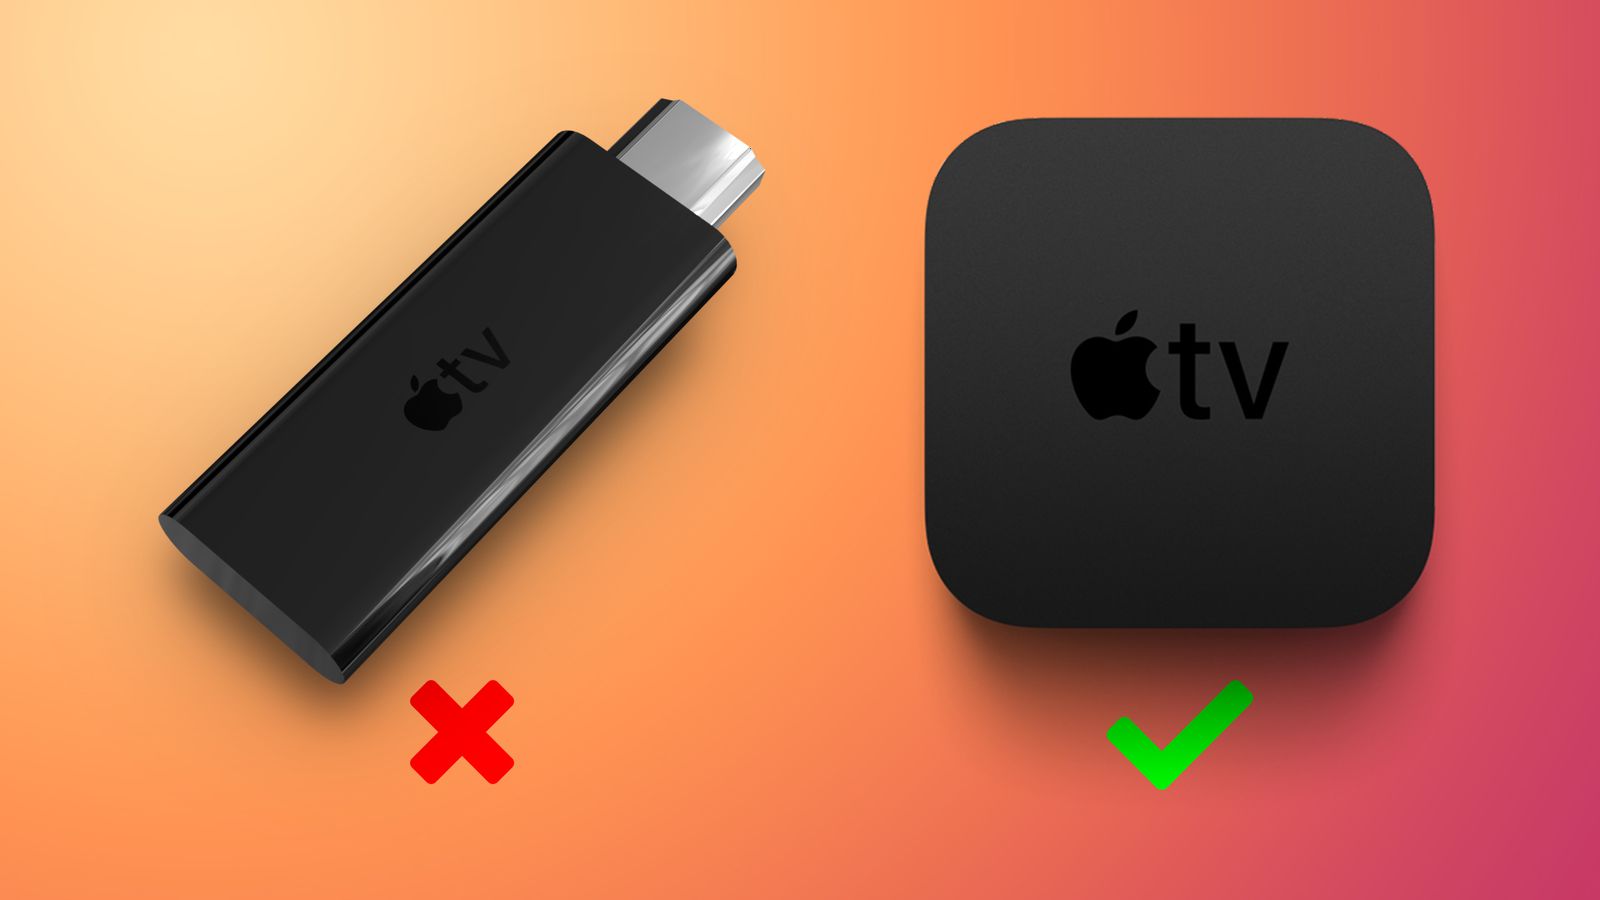 vurdere Selv tak Tarmfunktion Apple Abandoned Low-Cost TV Dongle Plans, but Looking to Double New Apple  TV+ Content Rate in 2022 - MacRumors